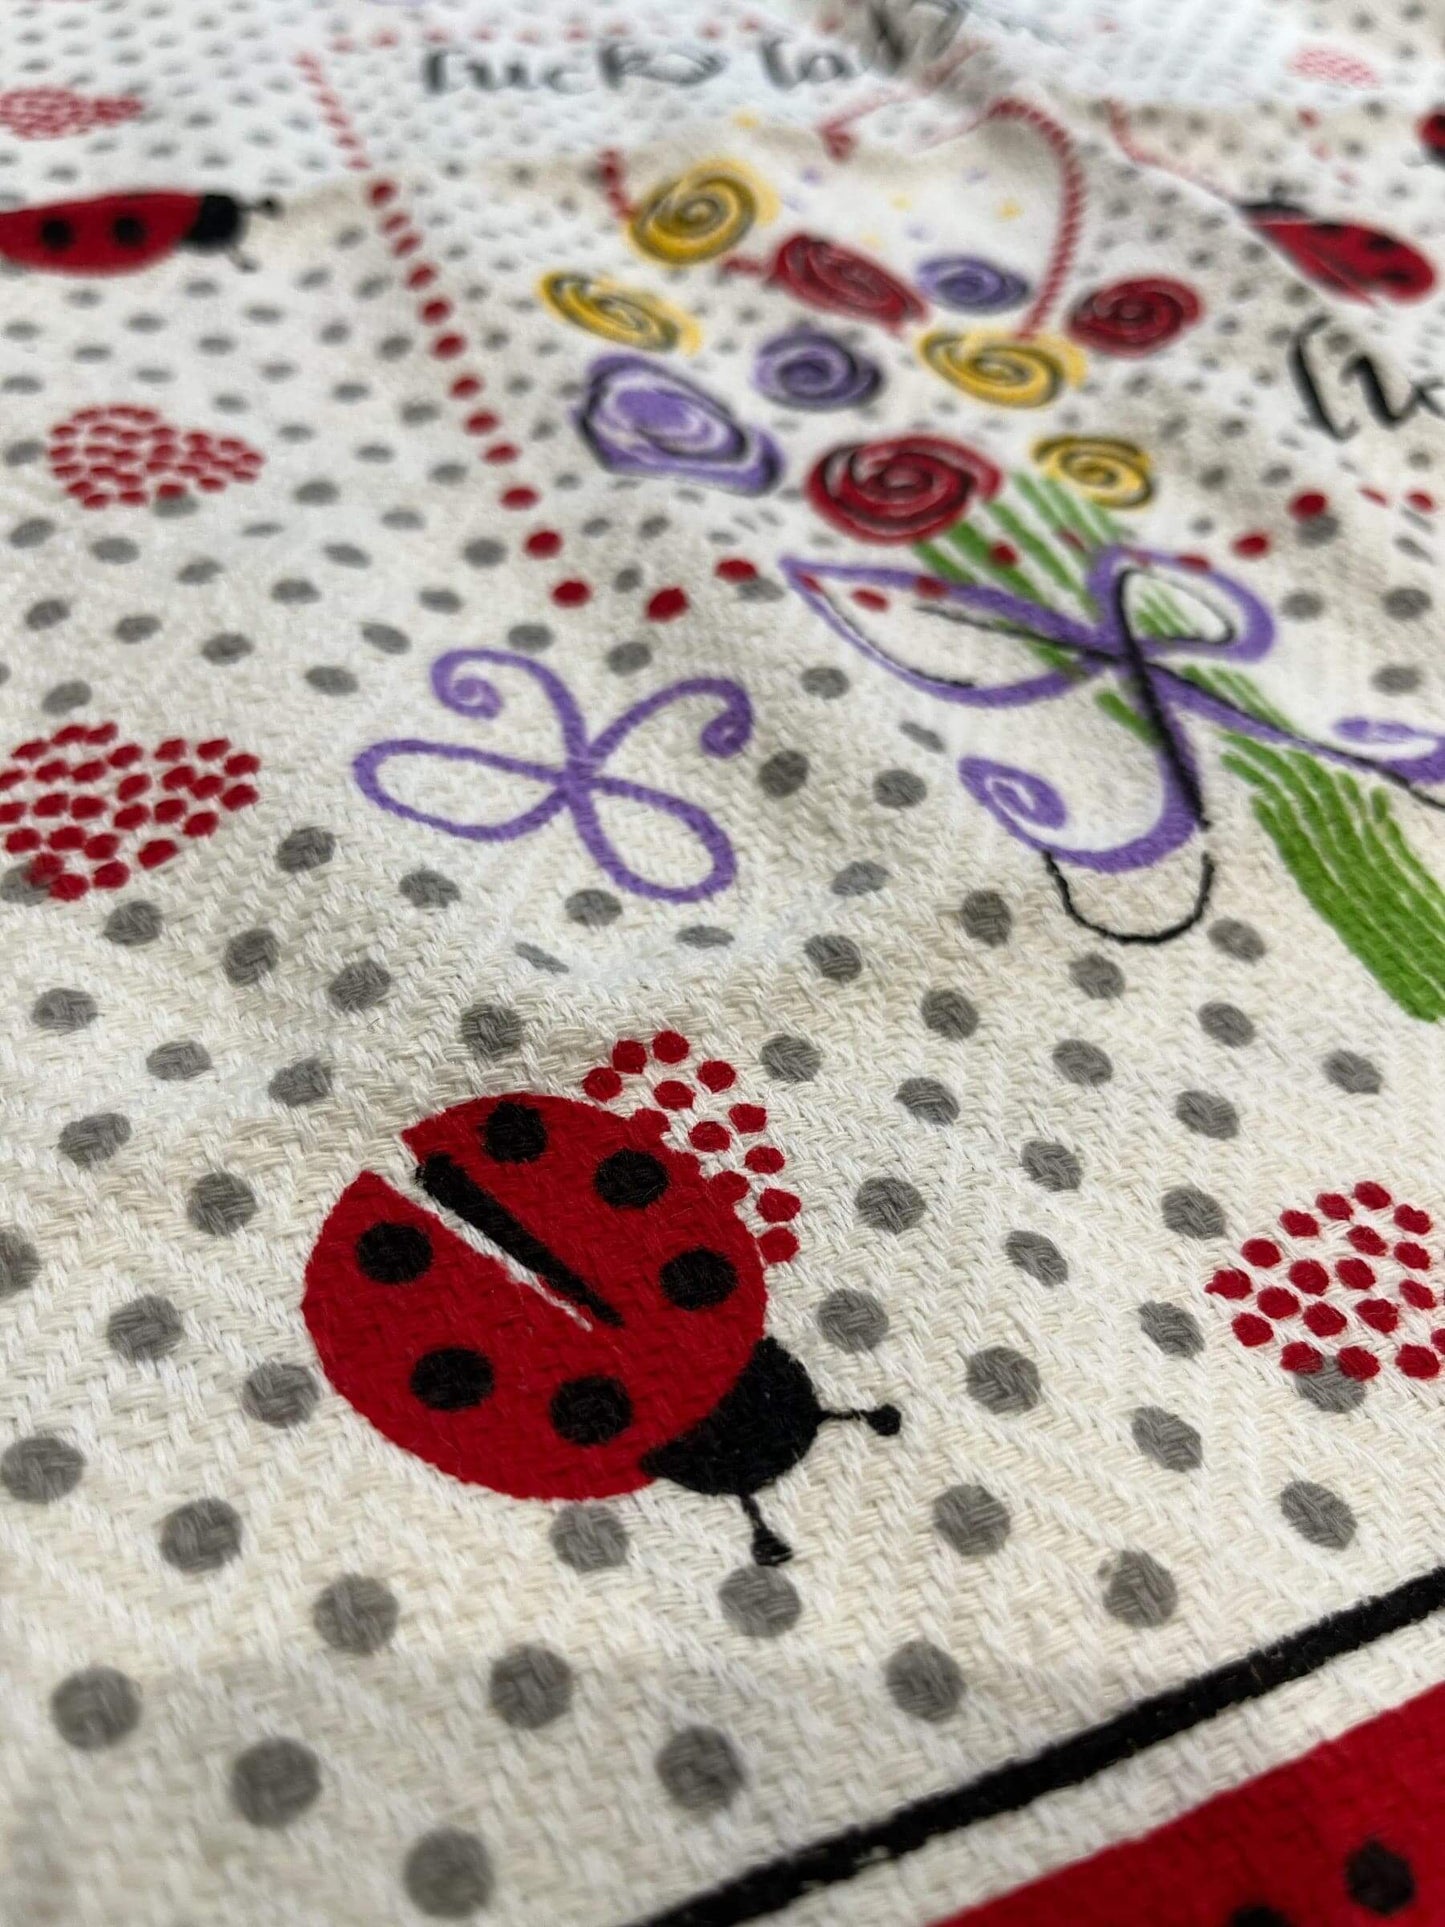 Tea Towels (Cotton Kitchen Towels) Ladybug100% Cotton Tea Towel, made in Turkey, These towels offer premium quality with their pure cotton composition, ensuring high absorbency for drying dishes and versatile use in various kitchen tasks. Their durability